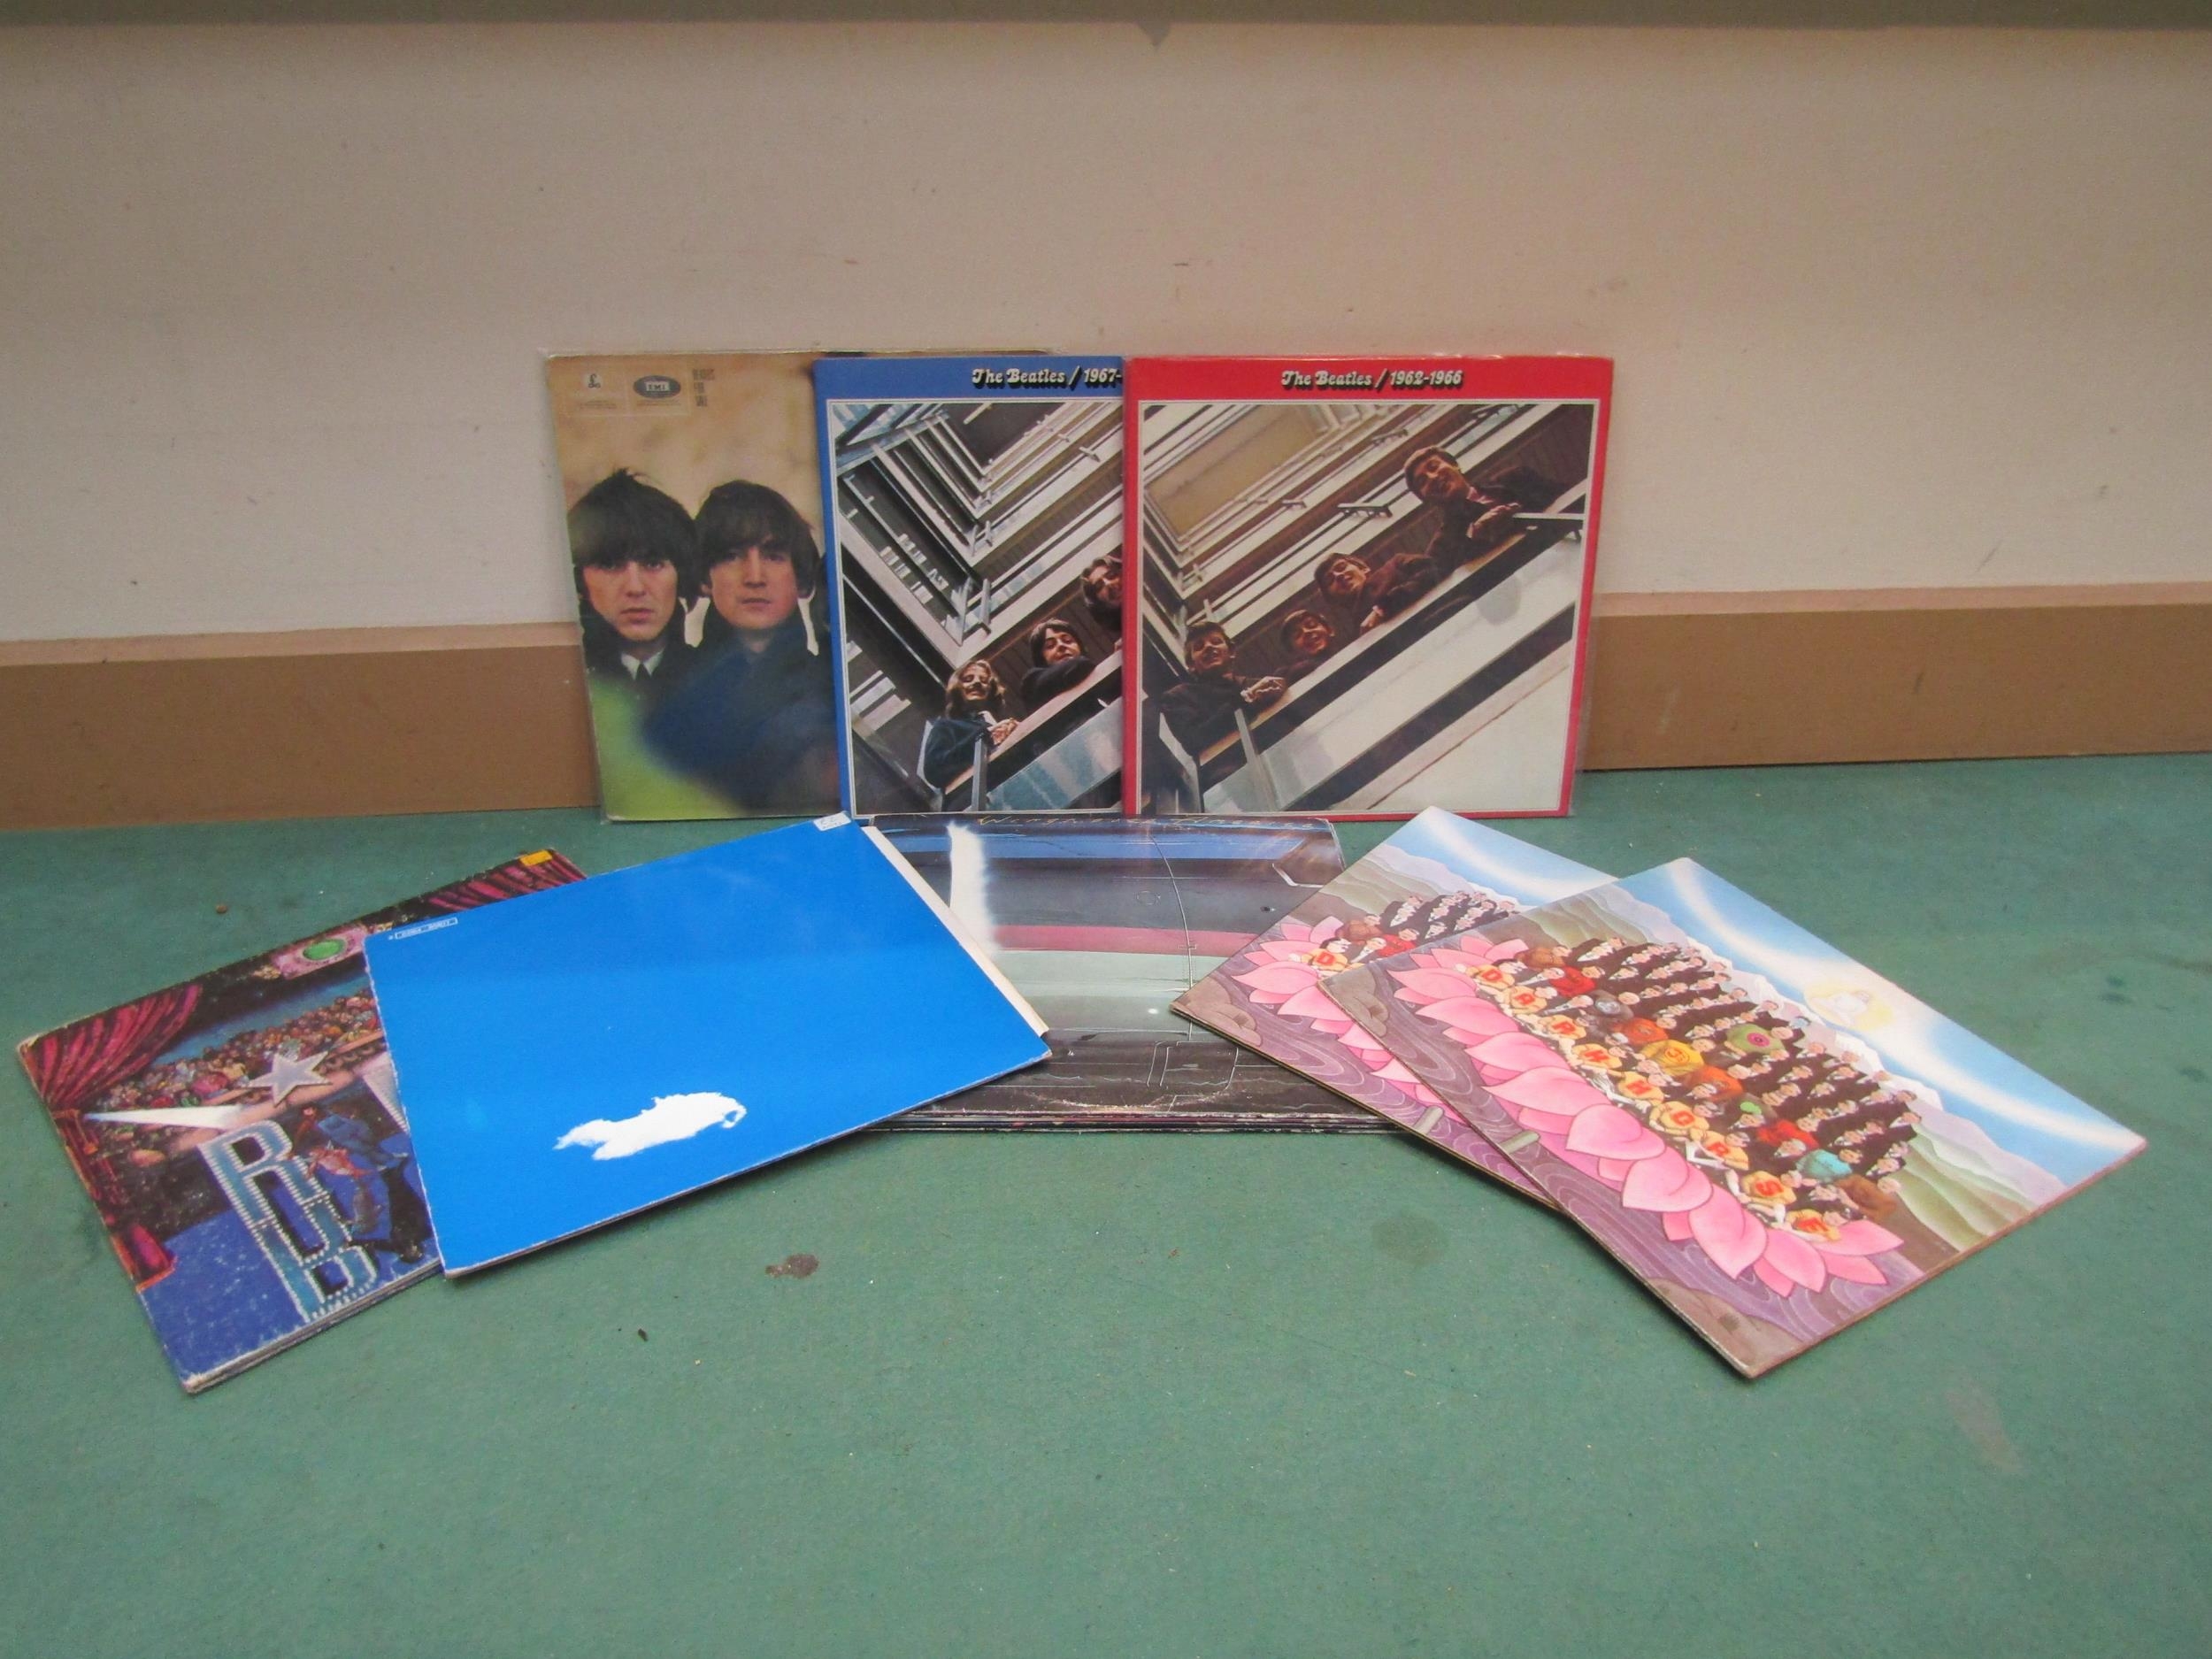 THE BEATLES: A collection of Beatles and related LP's to include 'Beatles For Sale' (PCS 3062,